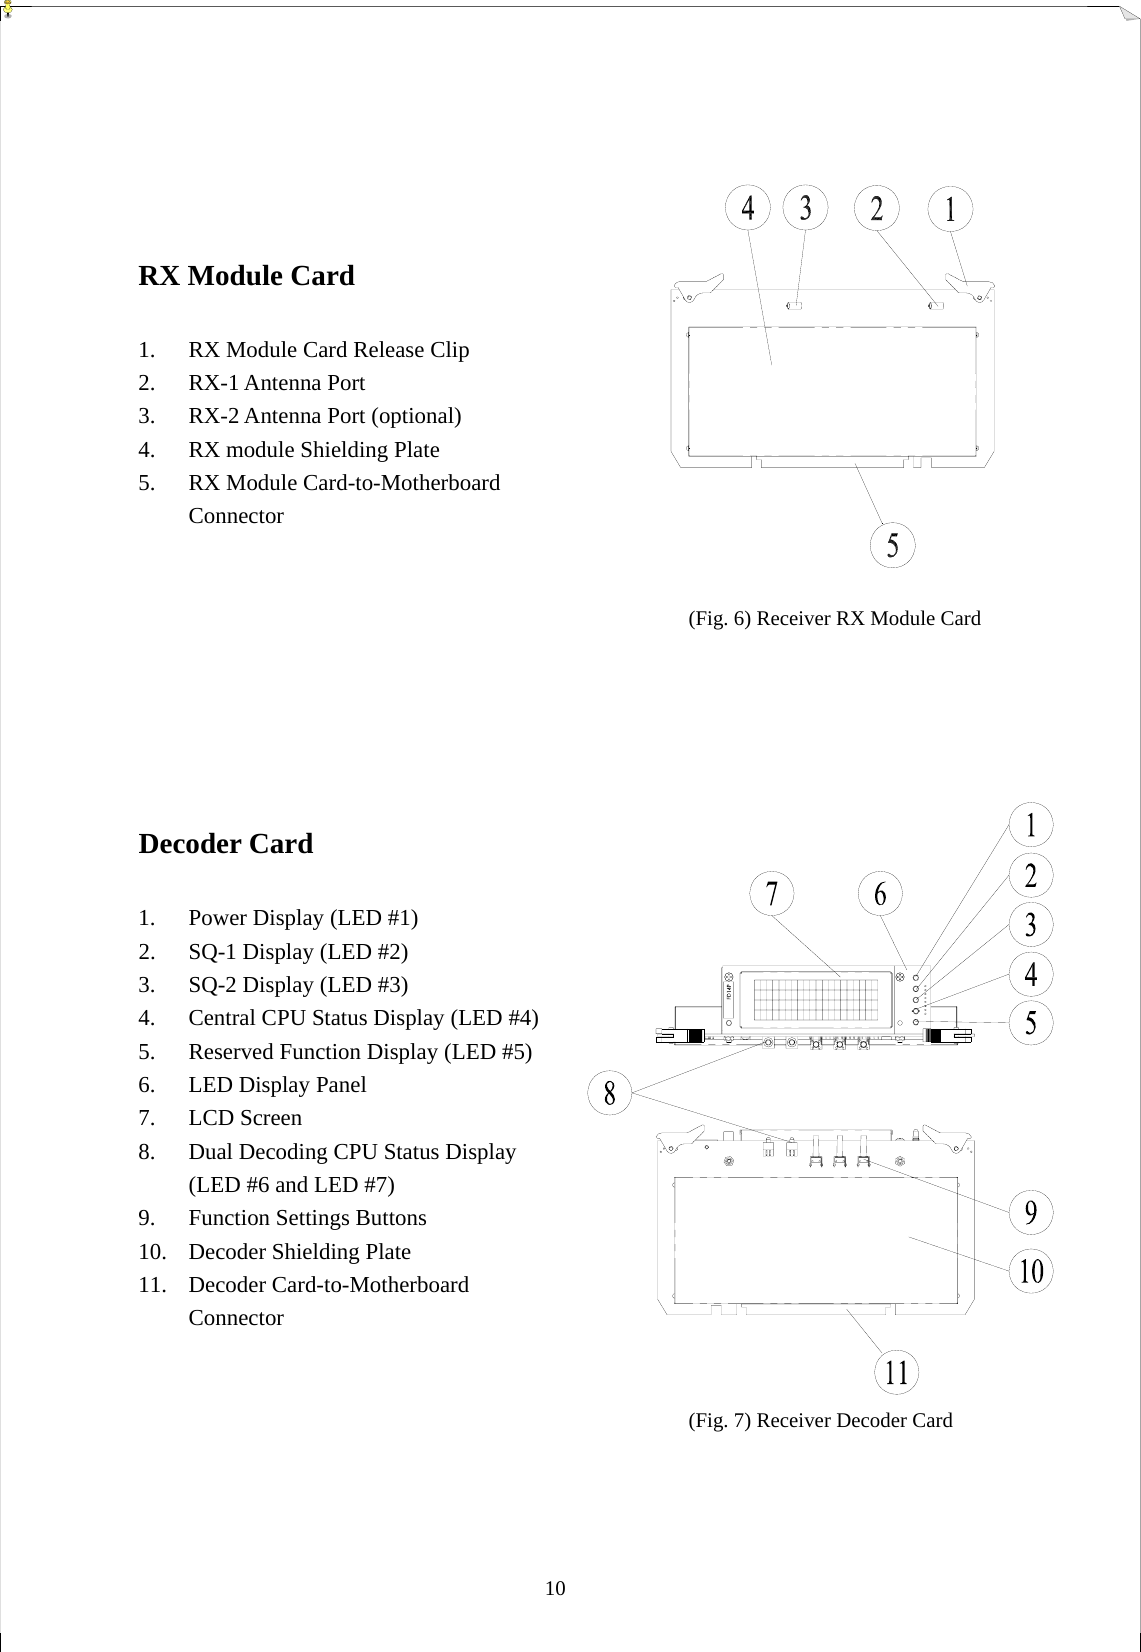  10     RX Module Card  1.  RX Module Card Release Clip 2. RX-1 Antenna Port 3.  RX-2 Antenna Port (optional) 4.  RX module Shielding Plate 5.  RX Module Card-to-Motherboard Connector    (Fig. 6) Receiver RX Module Card      Decoder Card  1.  Power Display (LED #1) 2.  SQ-1 Display (LED #2) 3.  SQ-2 Display (LED #3)     4.  Central CPU Status Display (LED #4) 5.  Reserved Function Display (LED #5) 6.  LED Display Panel 7. LCD Screen 8.  Dual Decoding CPU Status Display (LED #6 and LED #7) 9.  Function Settings Buttons 10.  Decoder Shielding Plate 11. Decoder Card-to-Motherboard Connector    (Fig. 7) Receiver Decoder Card    